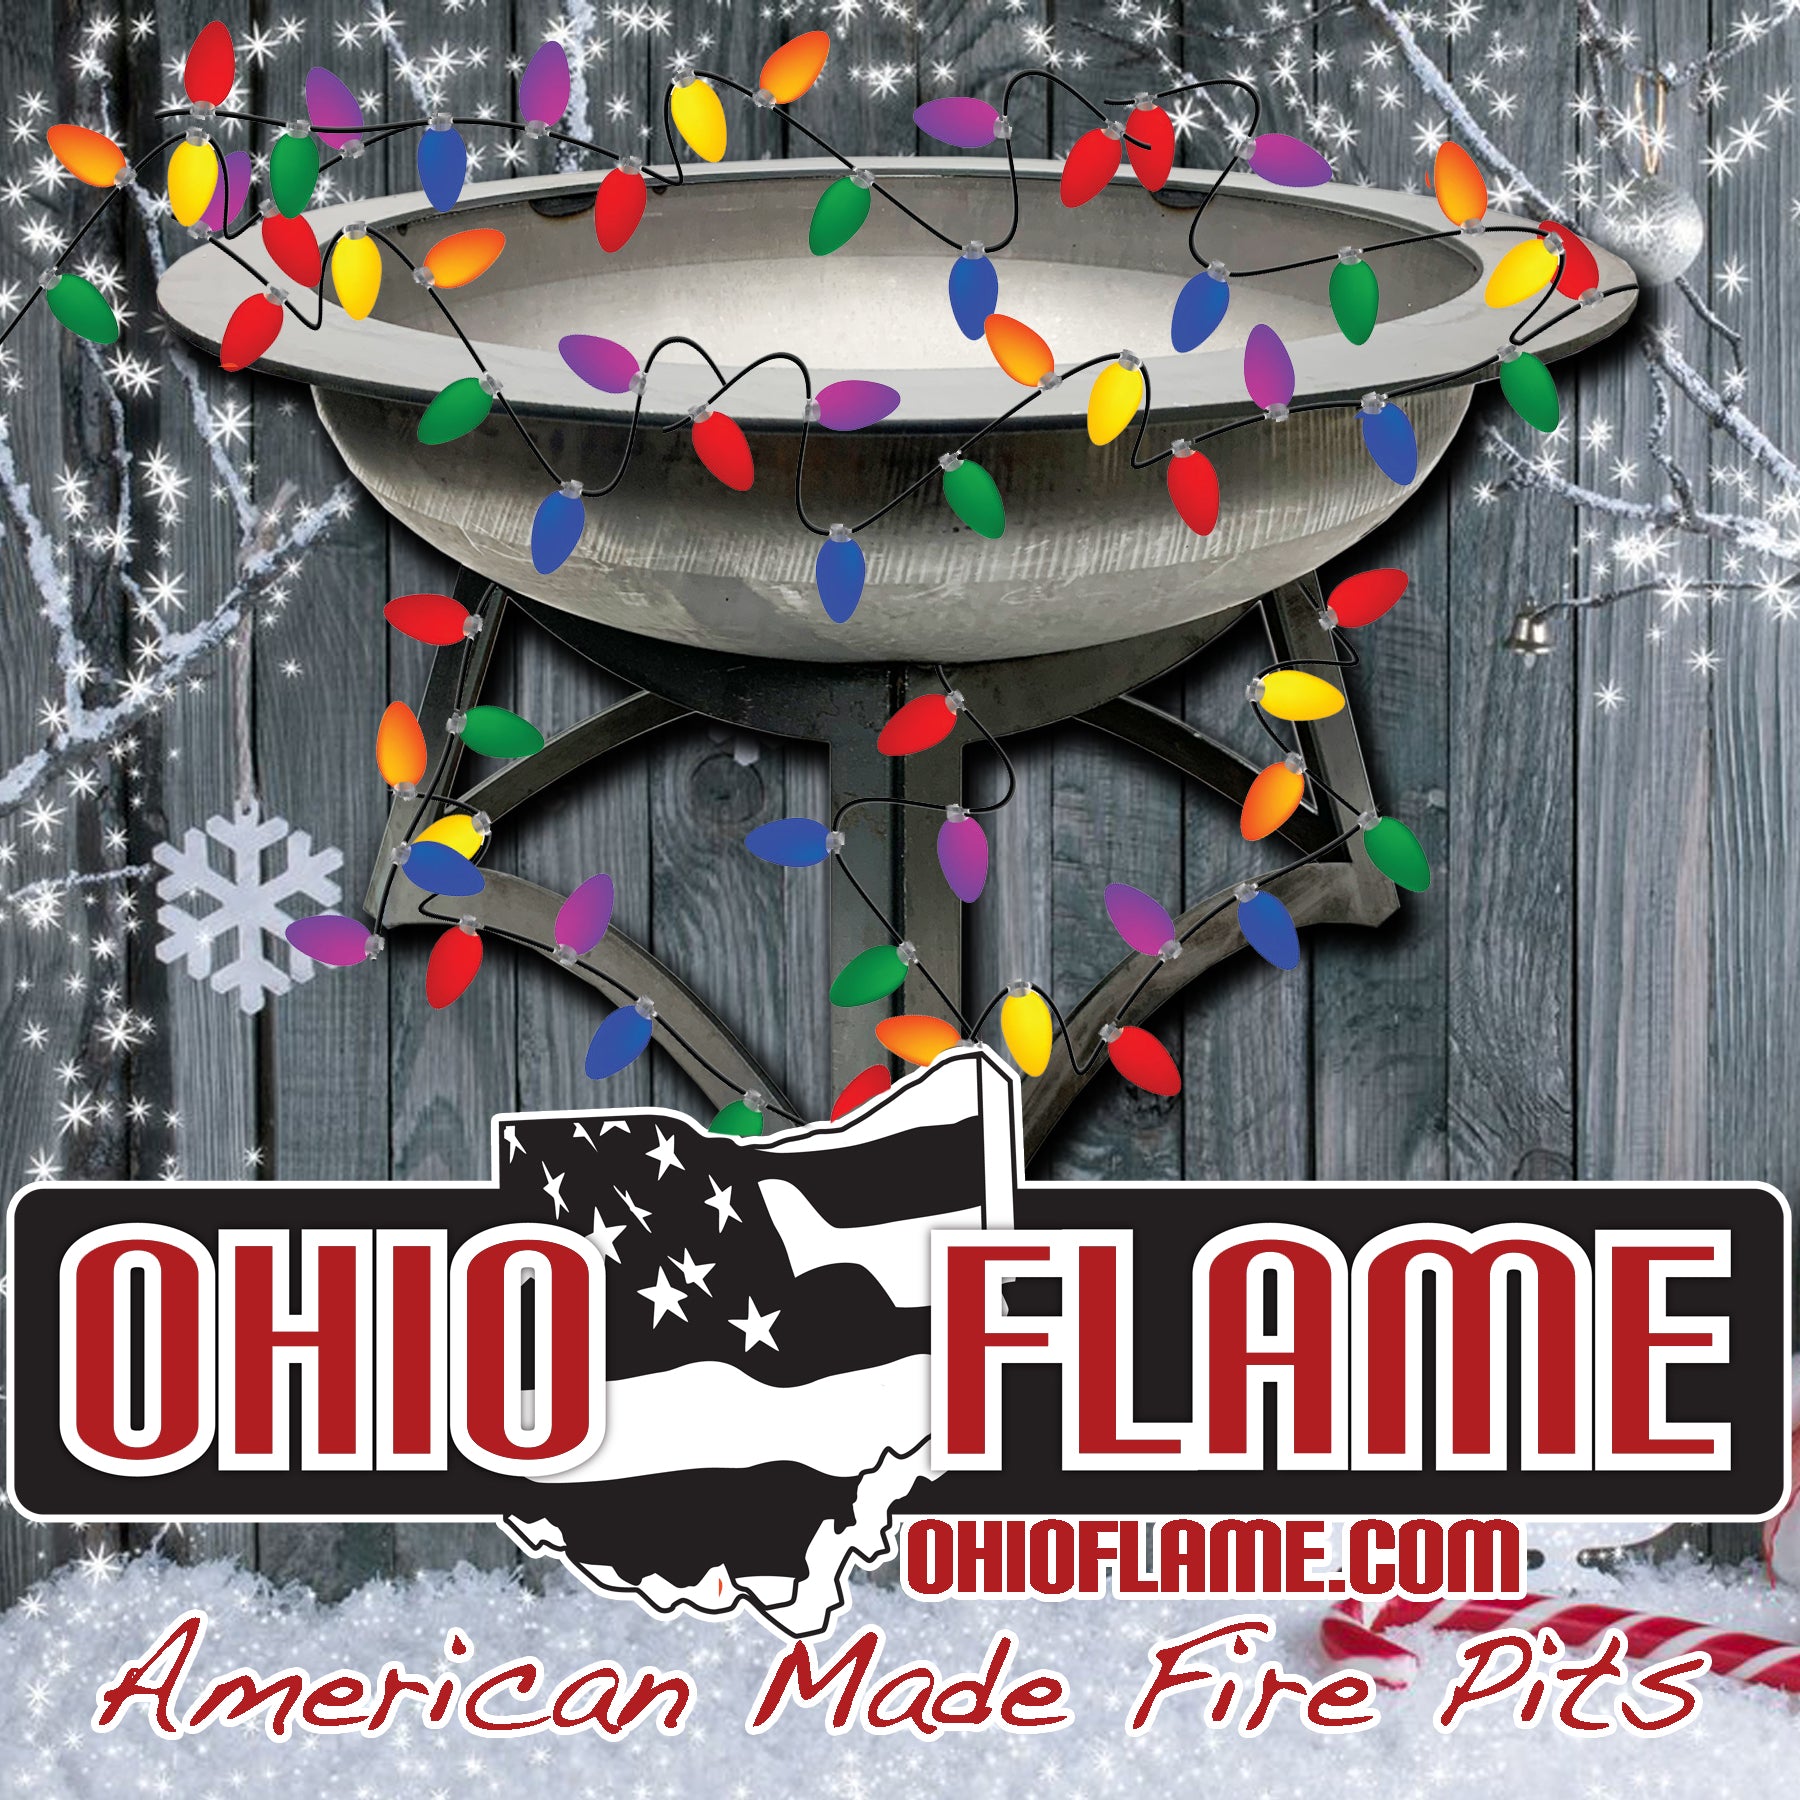 Holiday Deals at Ohio Flame